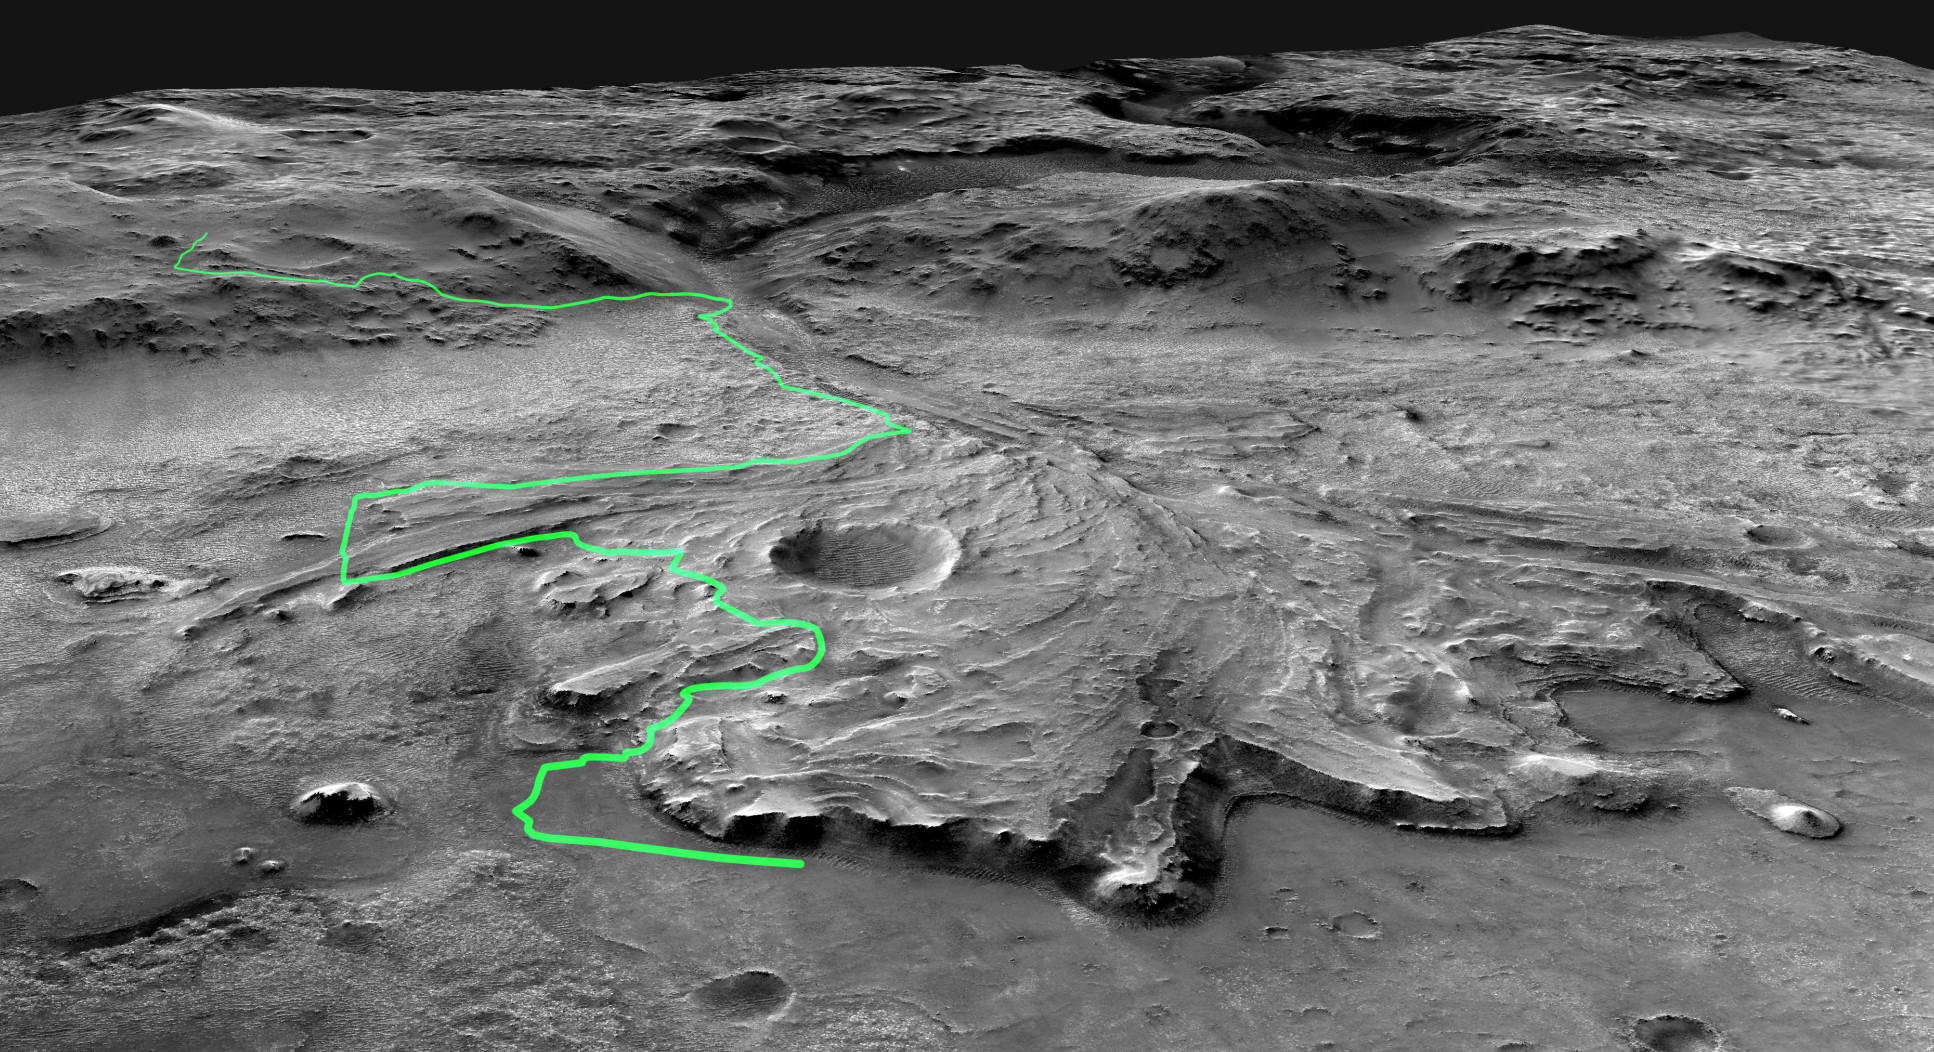 This annotated mosaic depicts a possible route the Mars 2020 Perseverance rover could take across Jezero Crater as it investigates several ancient environments that may have once been habitable. 